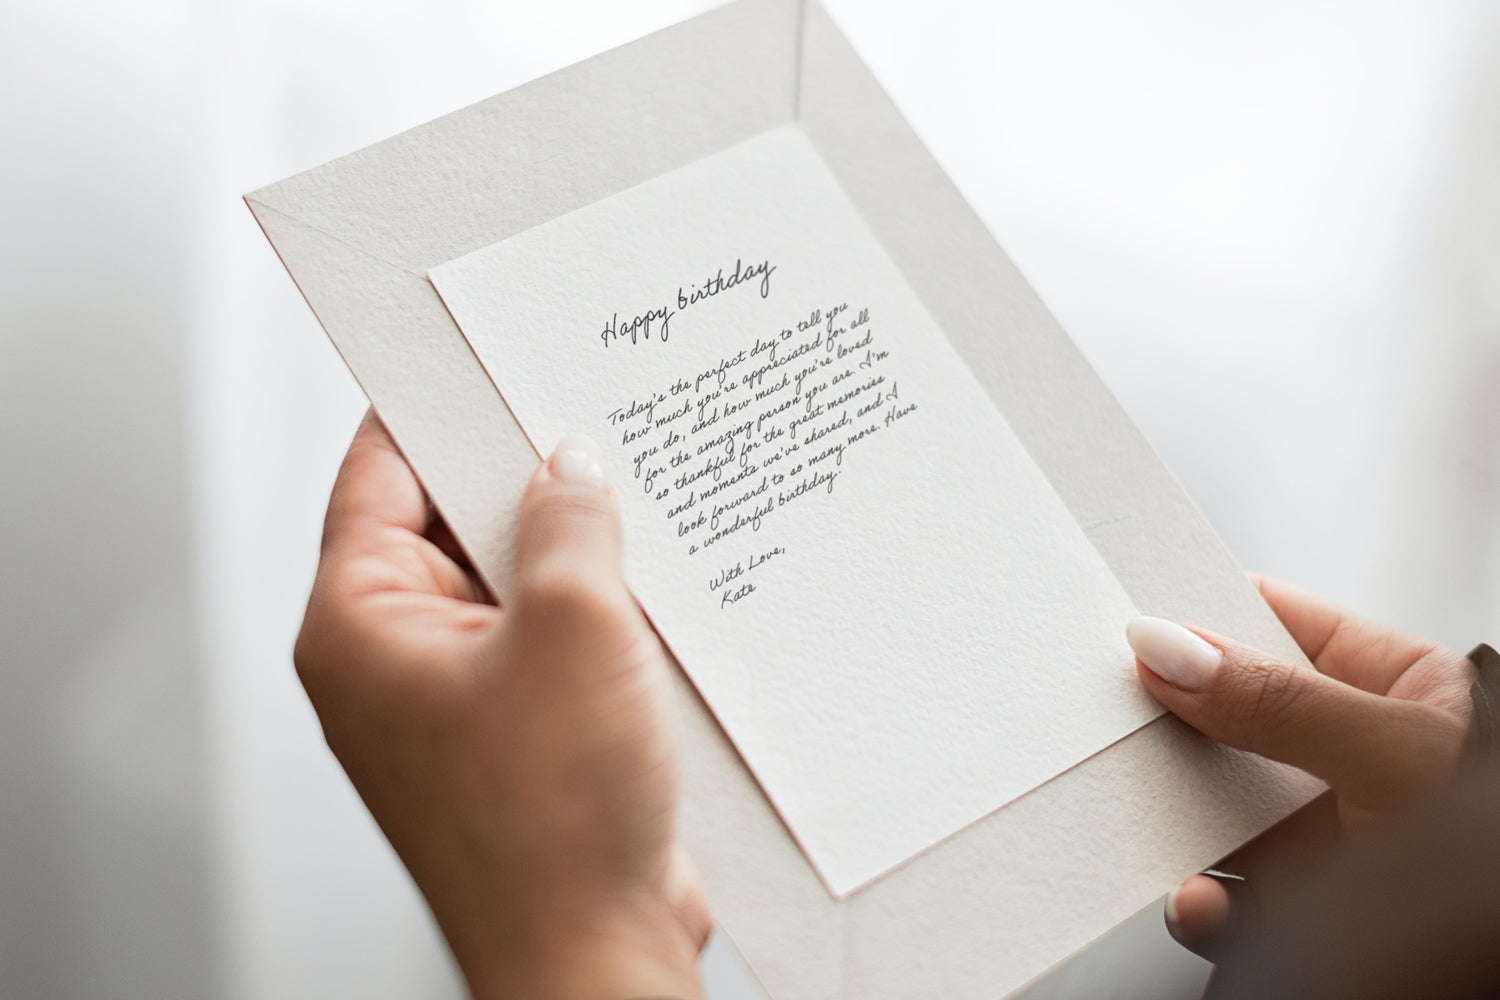 person holding a card with a birthday message written on it